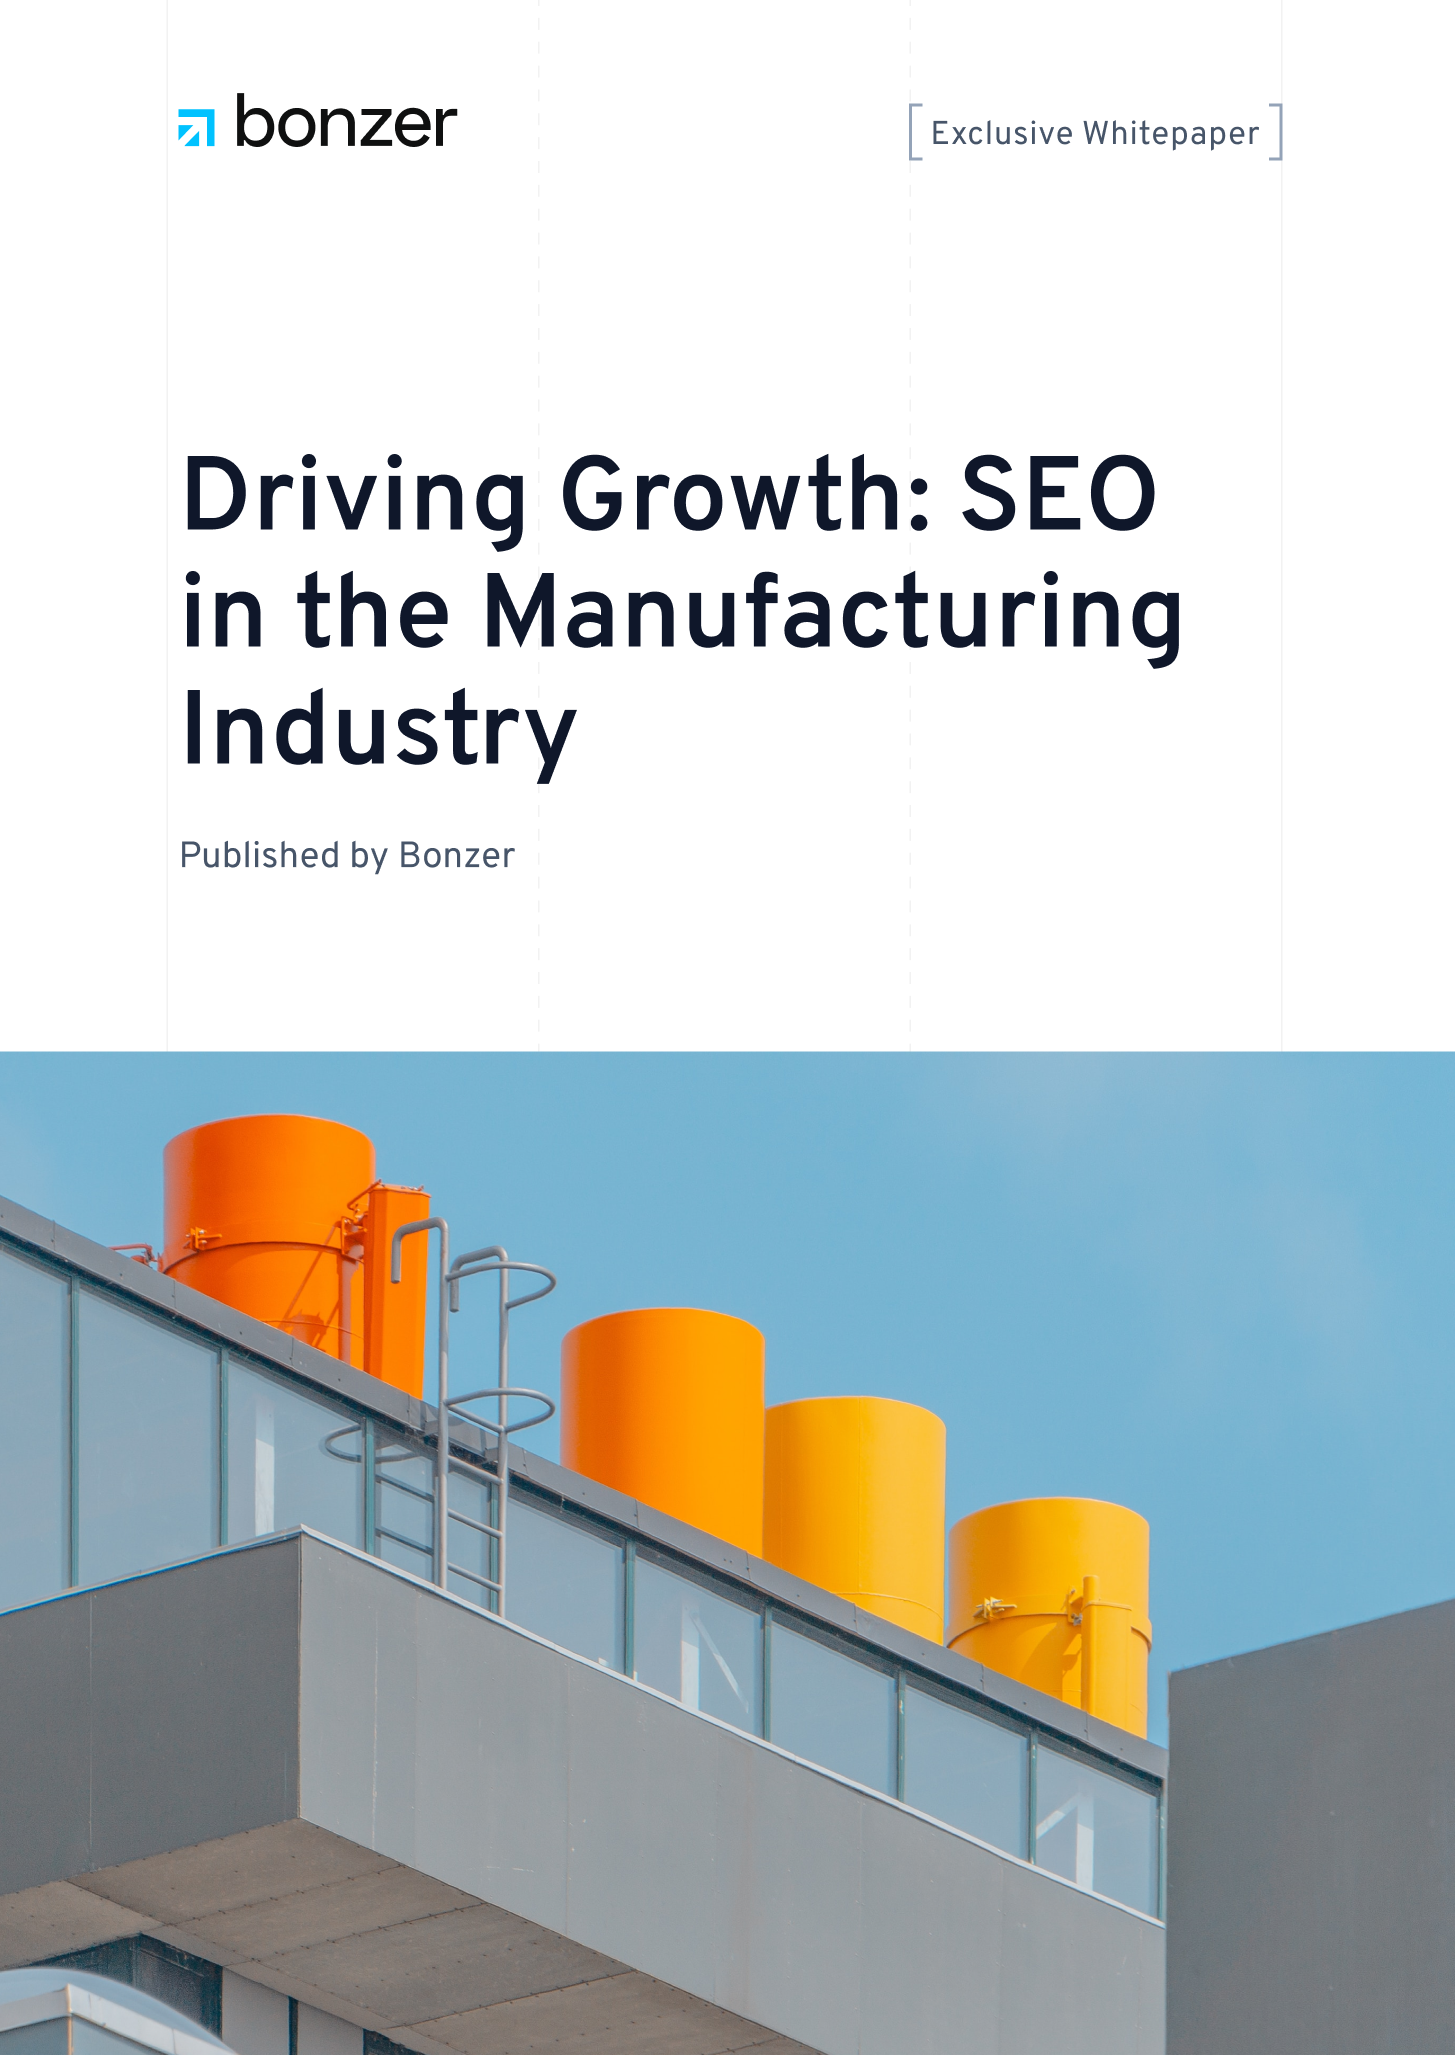 Driving Growth: SEO in the Manufacturing Industry